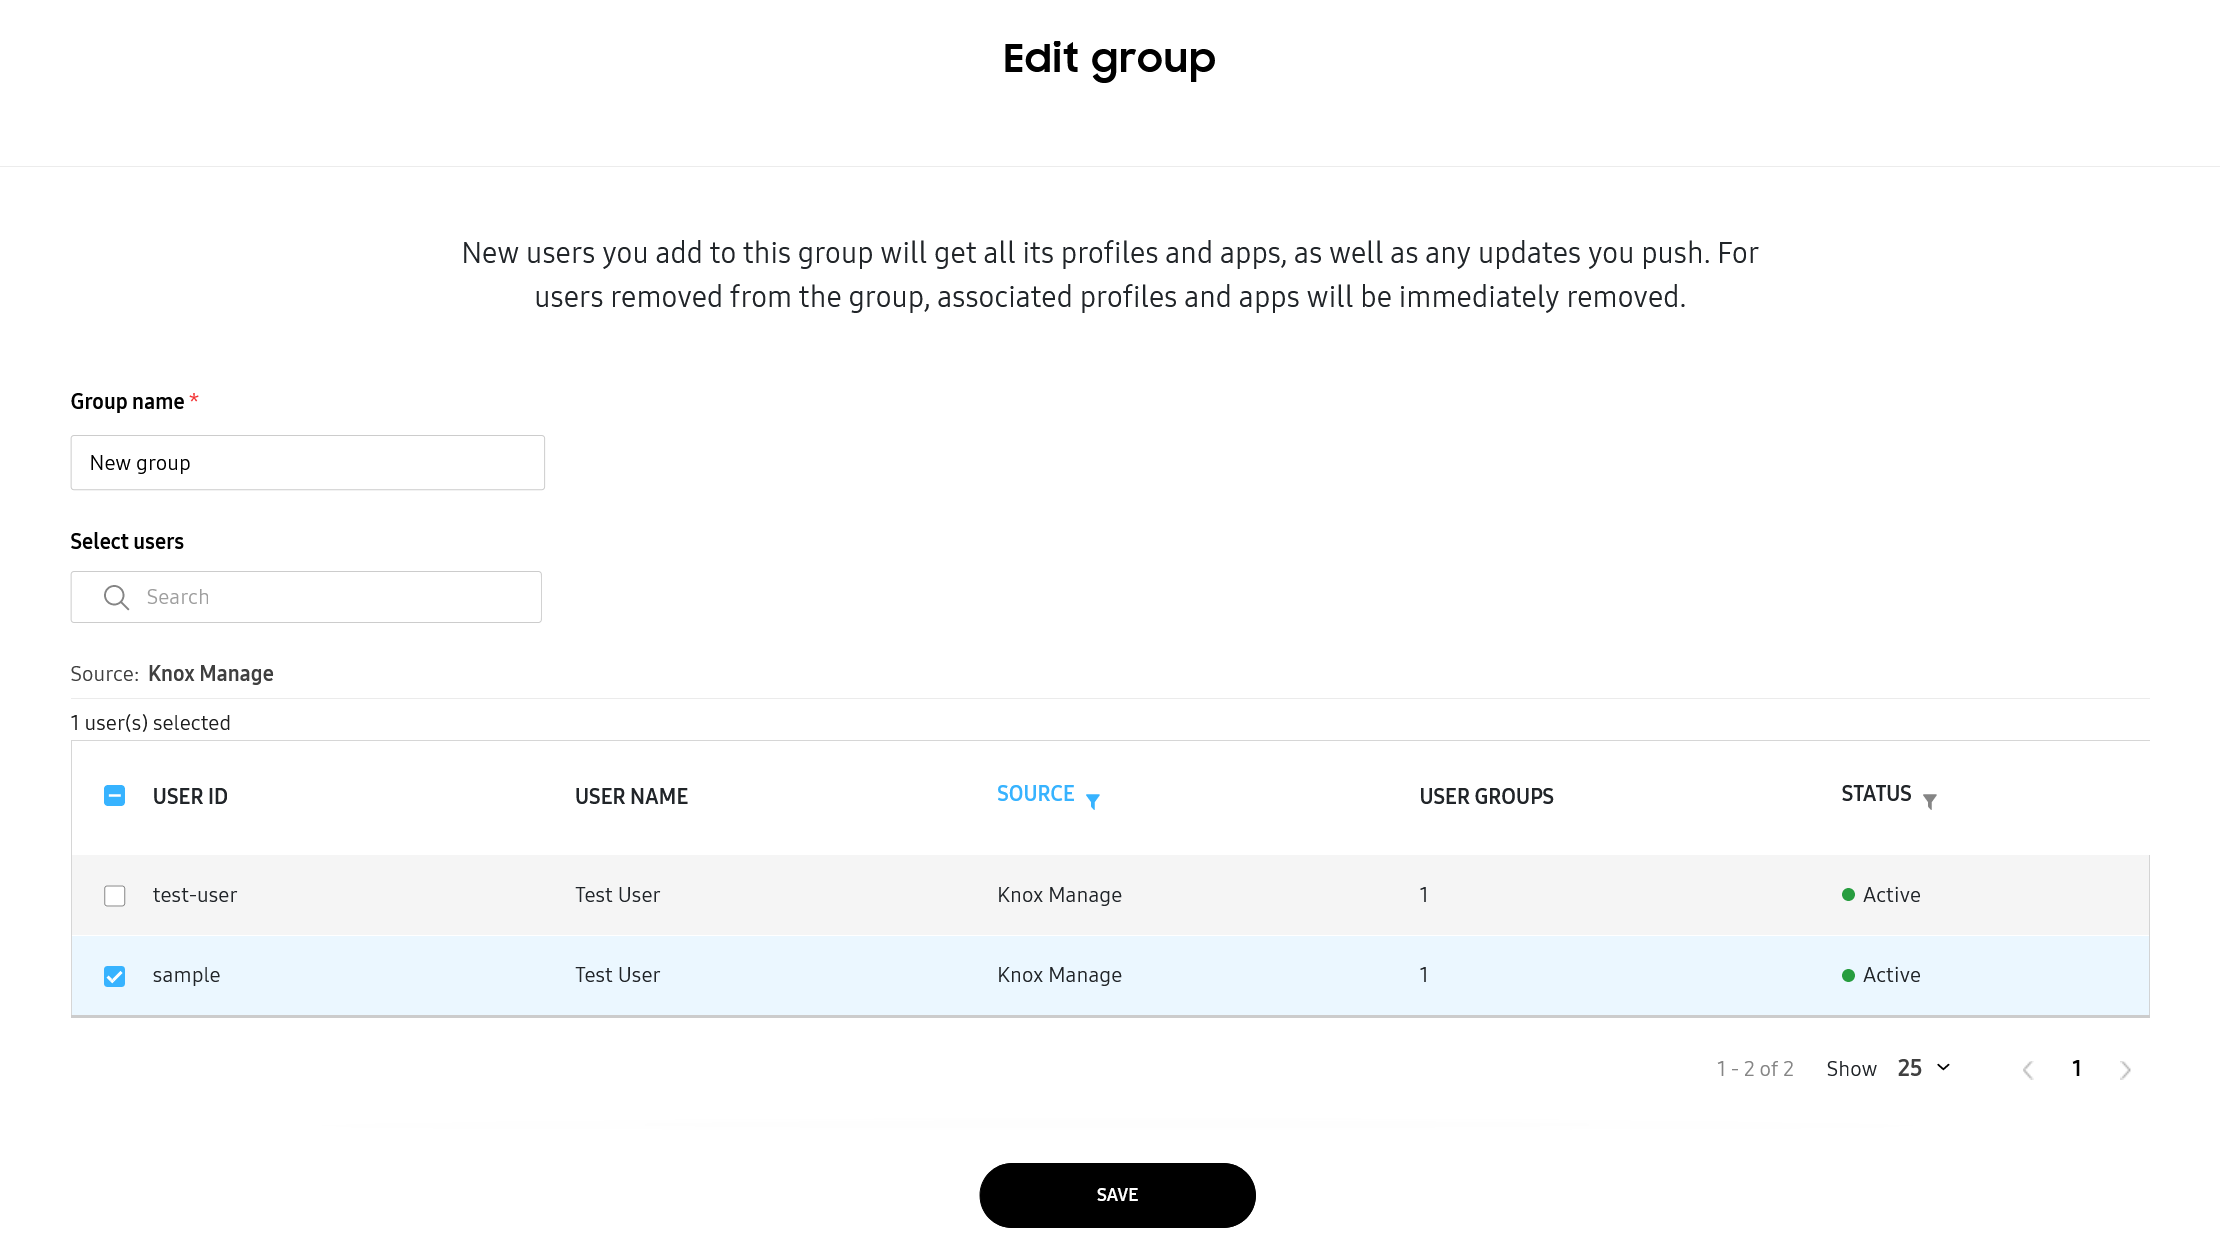 Edit group page